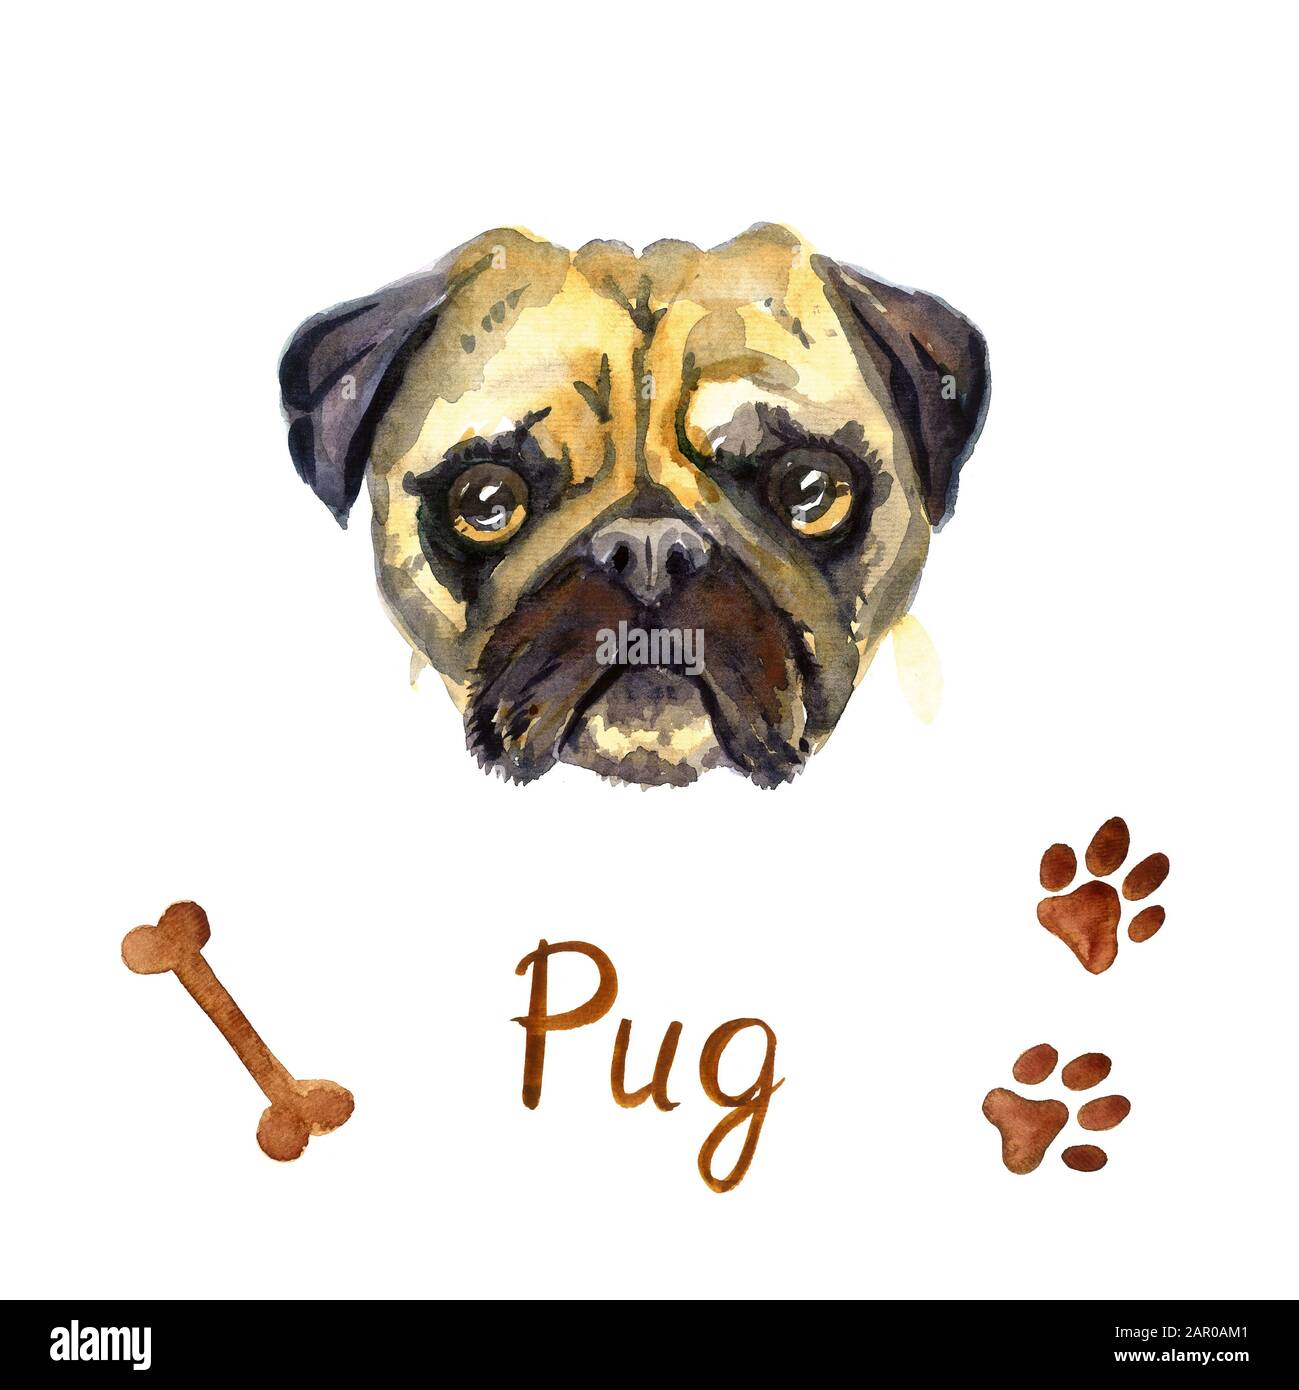 Pug Face High Resolution Stock Photography and Images - Alamy